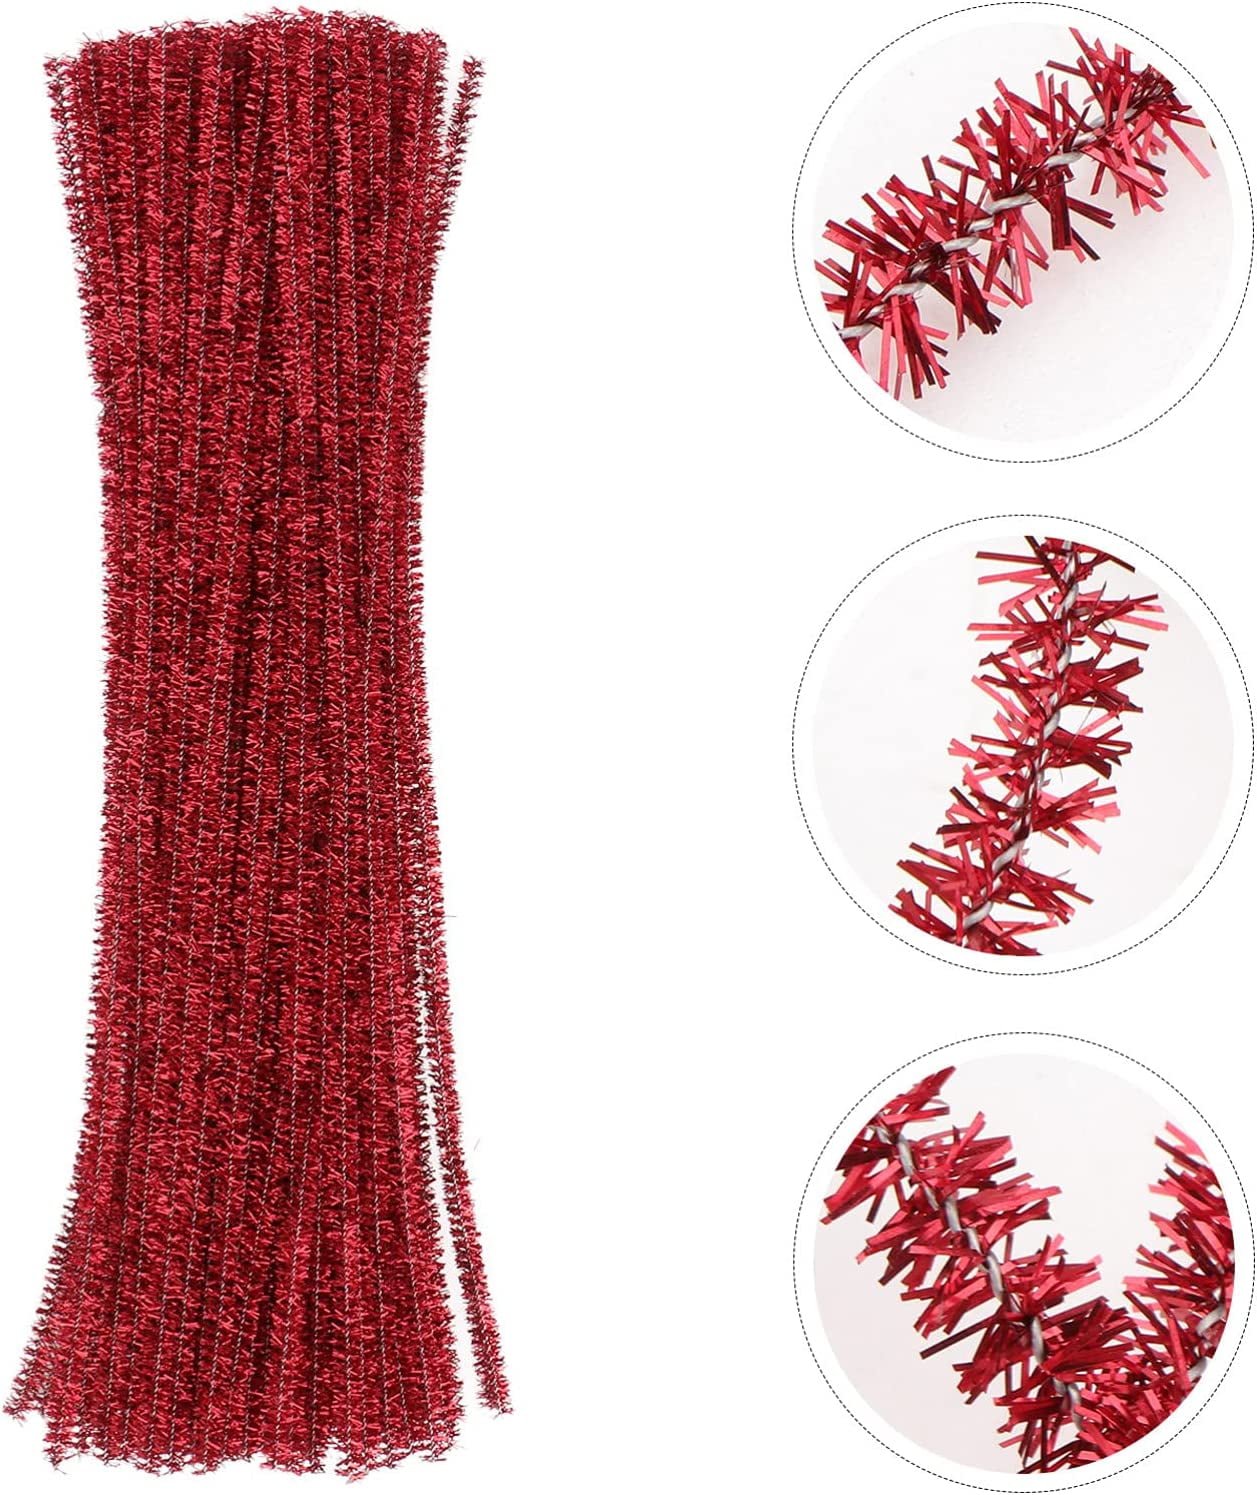 Red and White Two Tone Pipe Cleaners, 12'' x 6 mm Diameter, Red / Burgundy, Craft Supplies from Factory Direct Craft